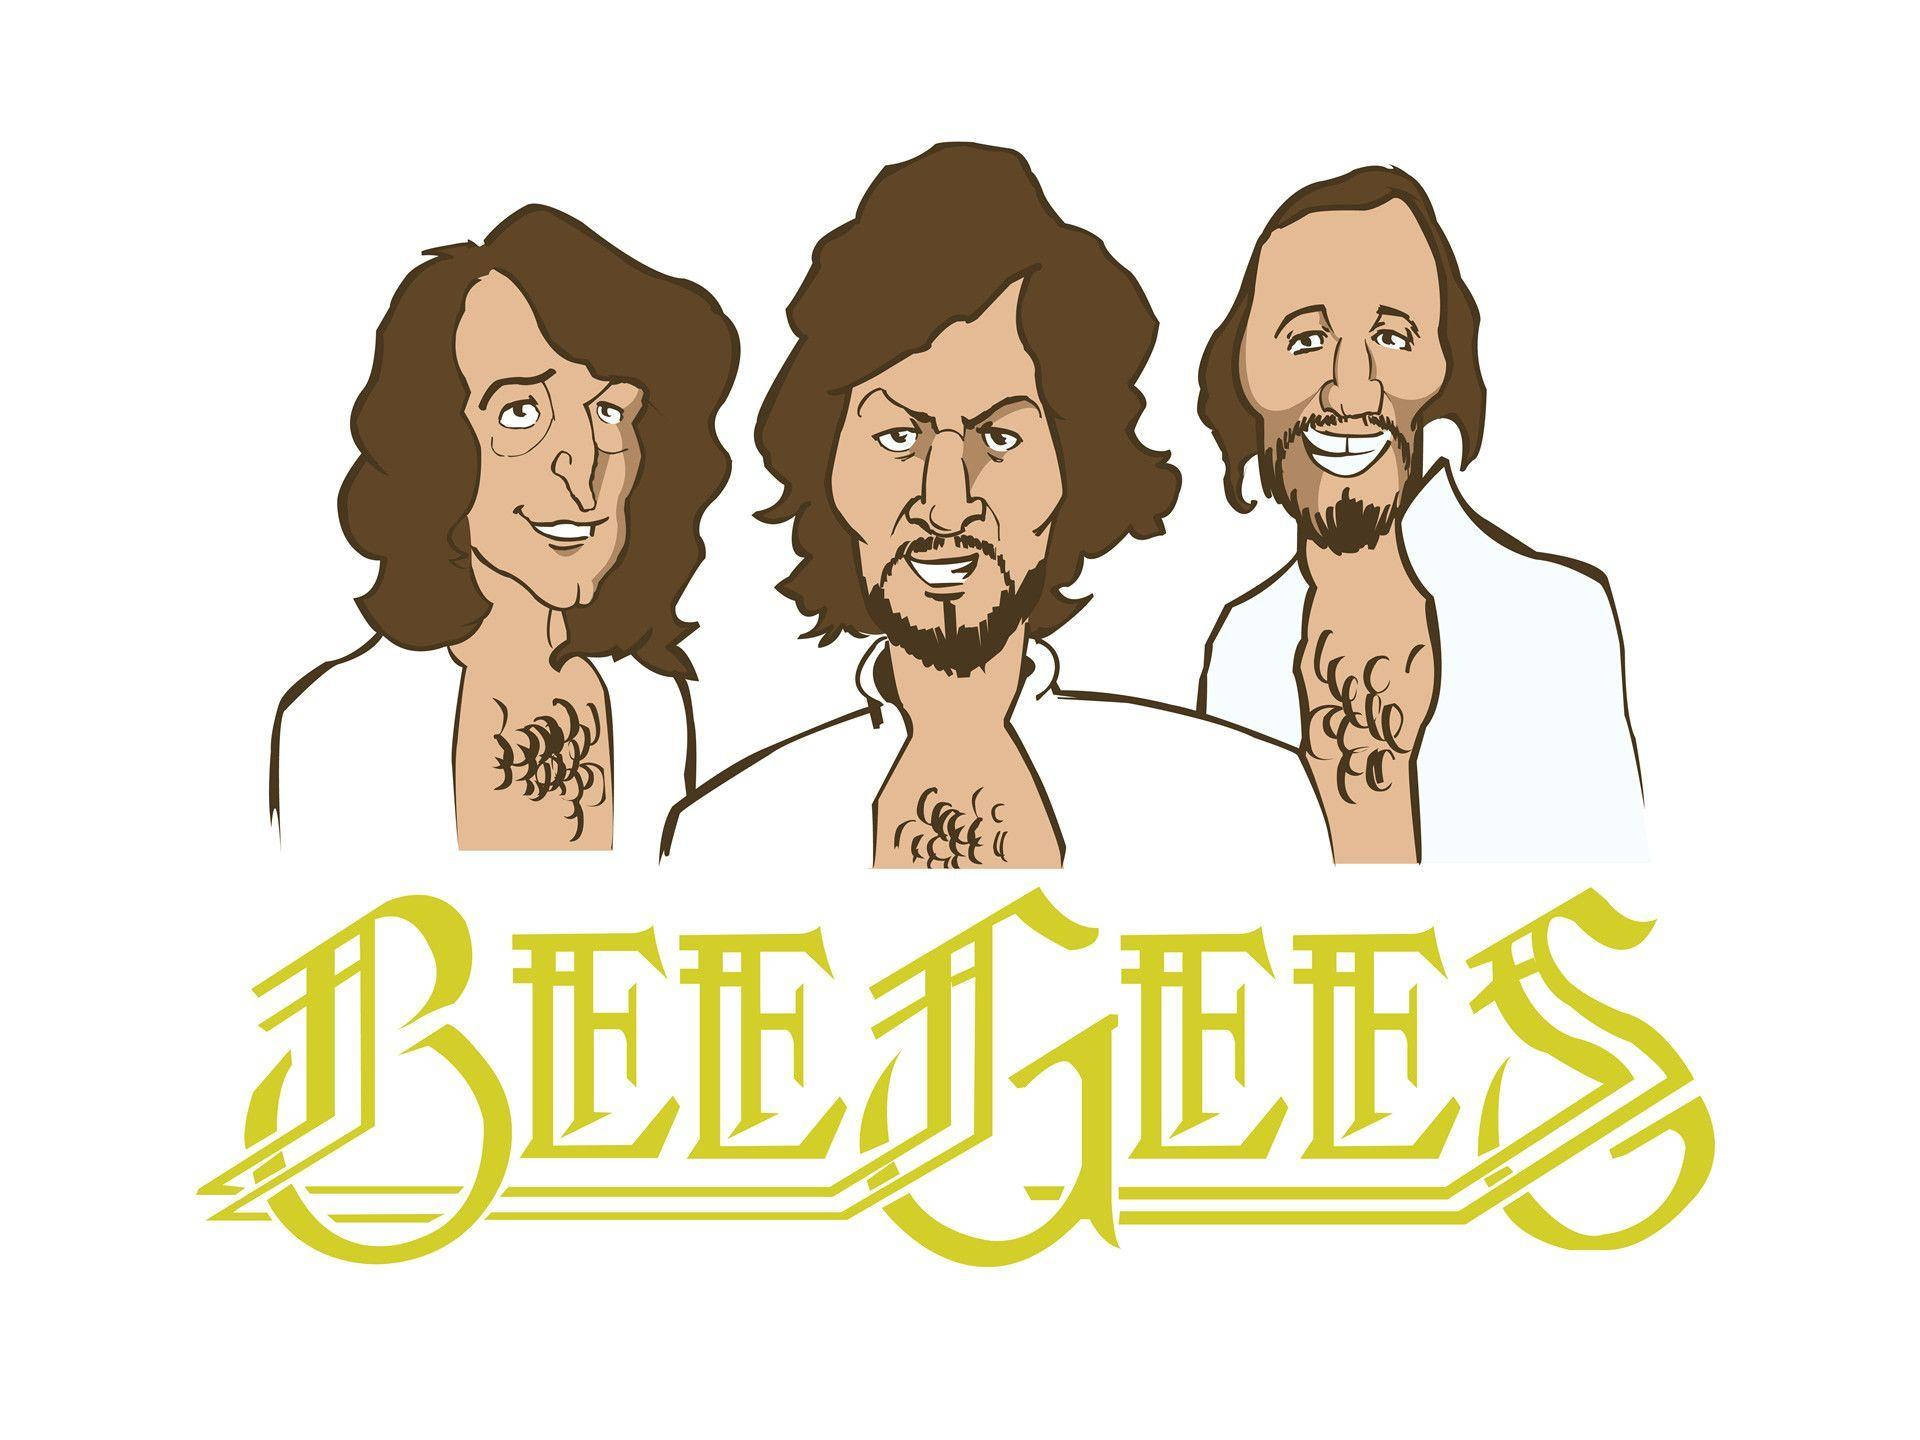 Bee Gees Musical Group Vector Art Background